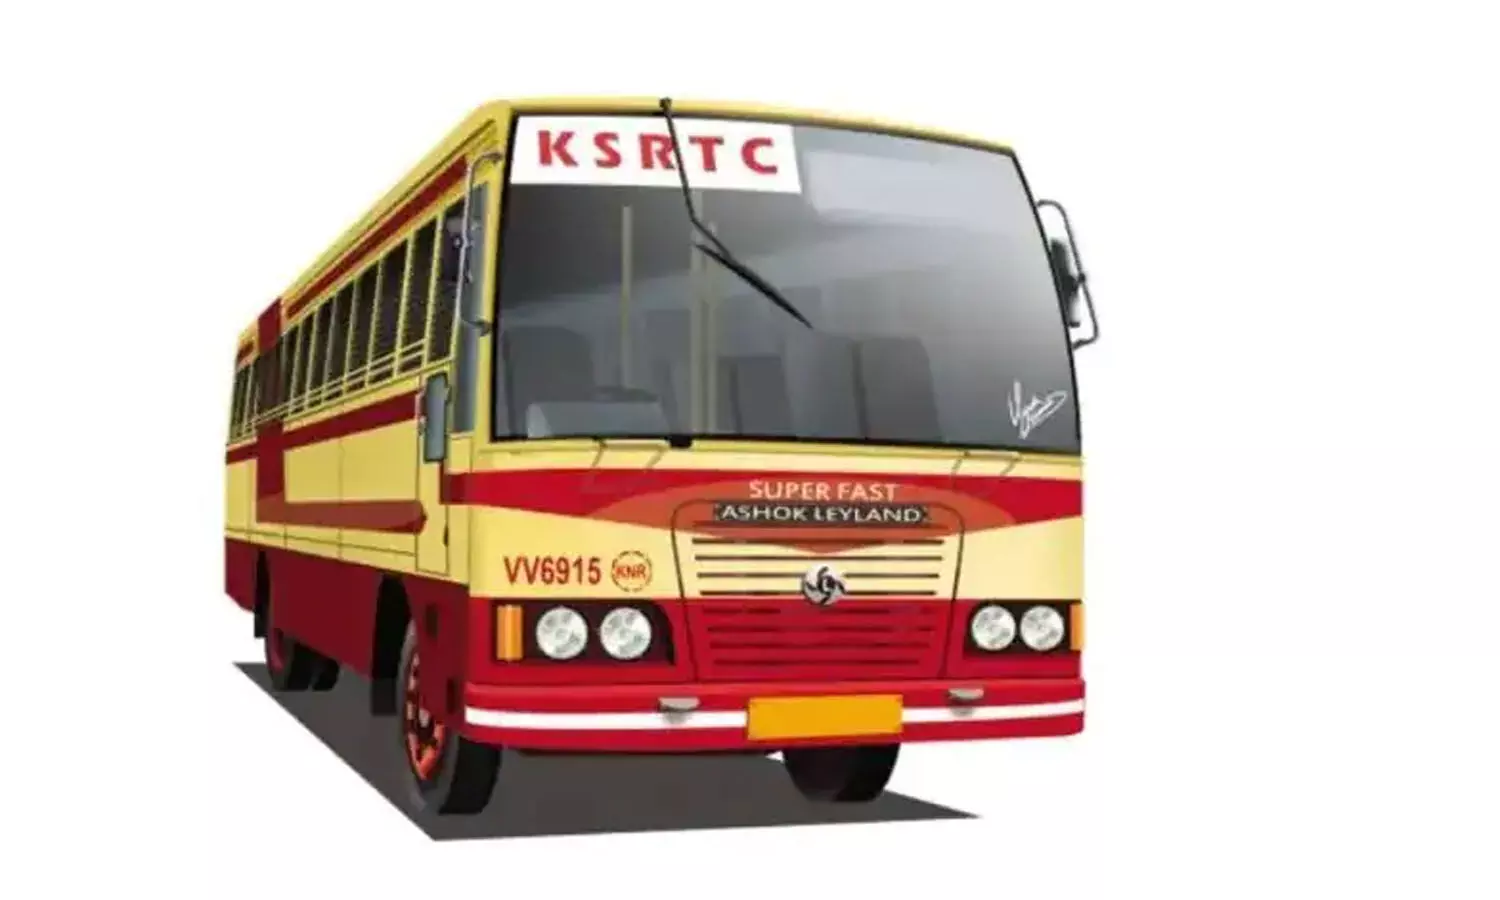 KSRTC bus stolen from Chincholi bus stand, police find it at Tandur in hours